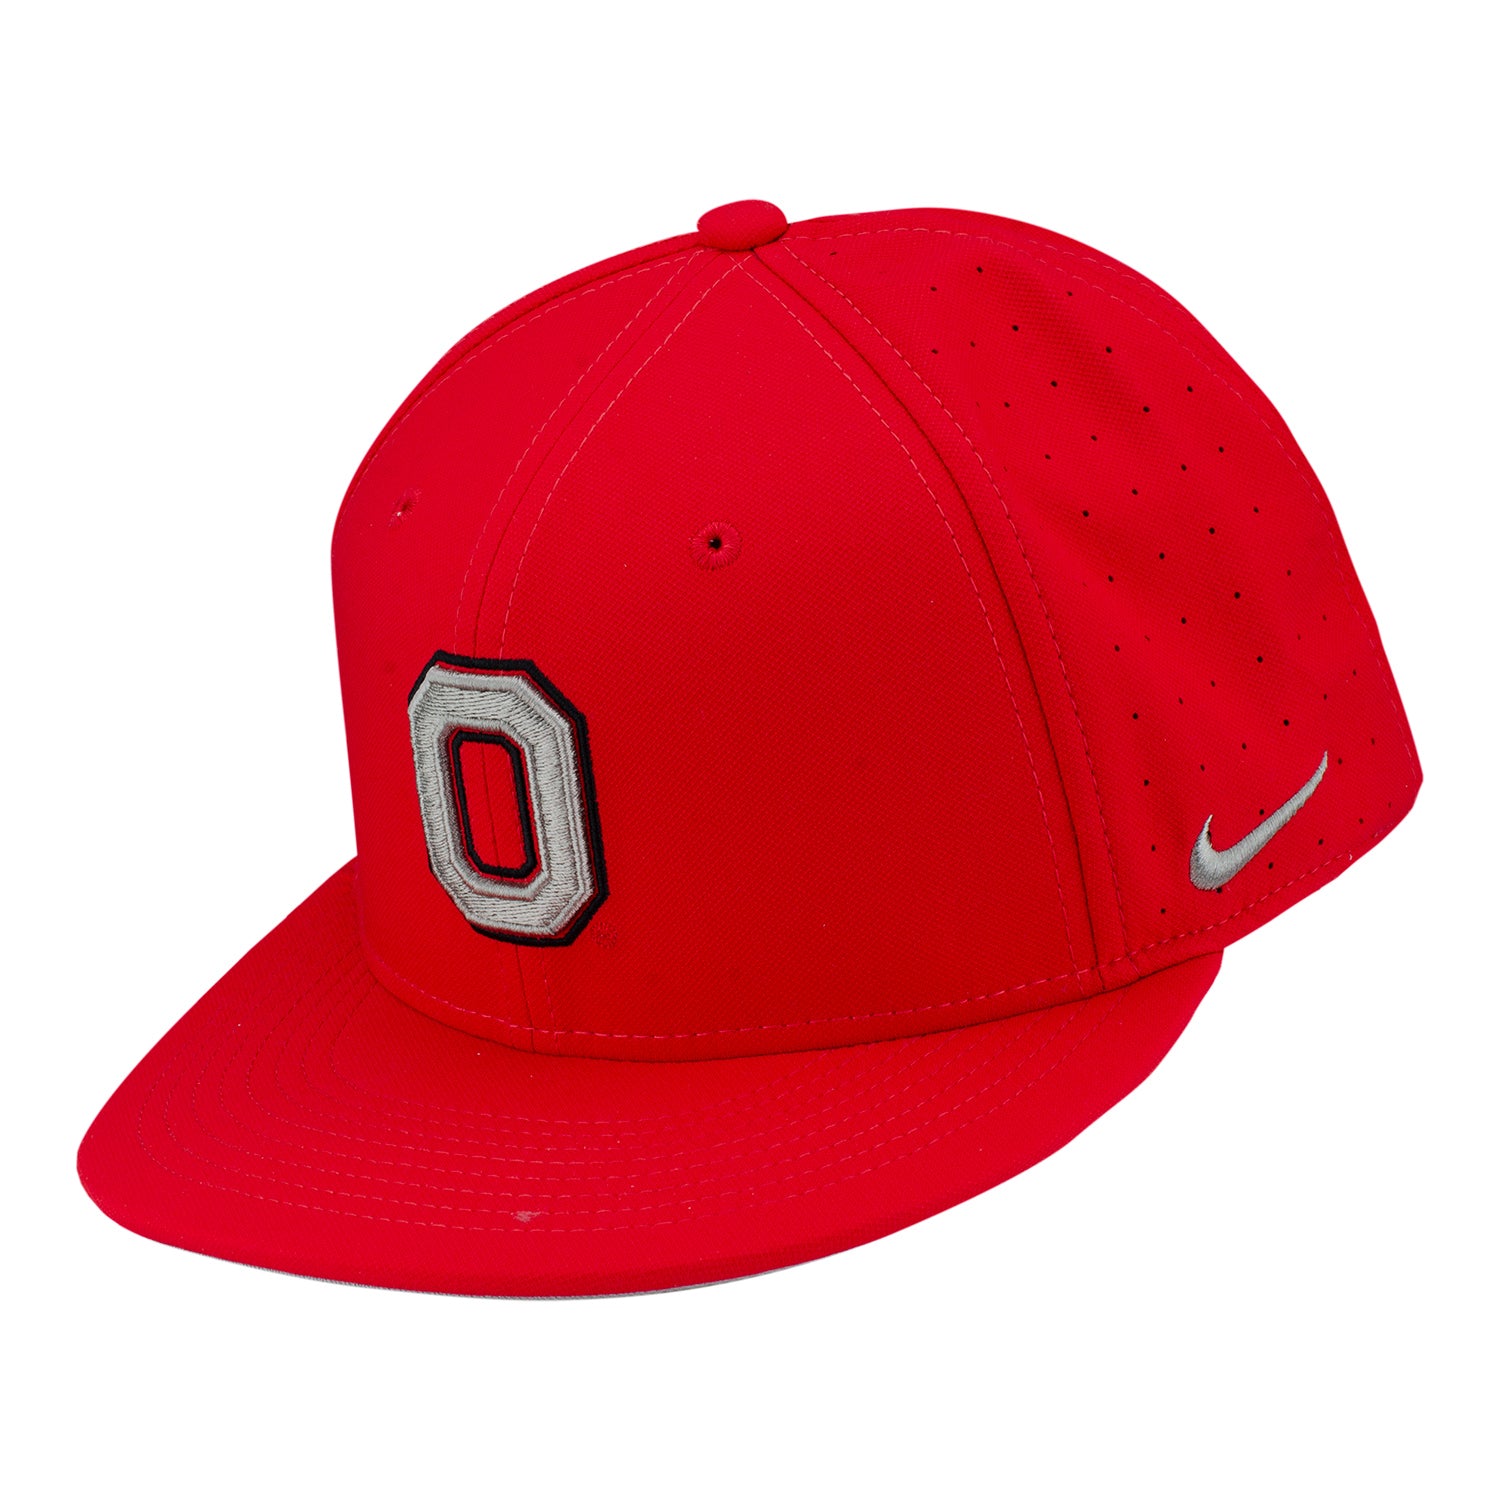 Ohio State Buckeyes Nike AeroBill Block O Fitted Hat